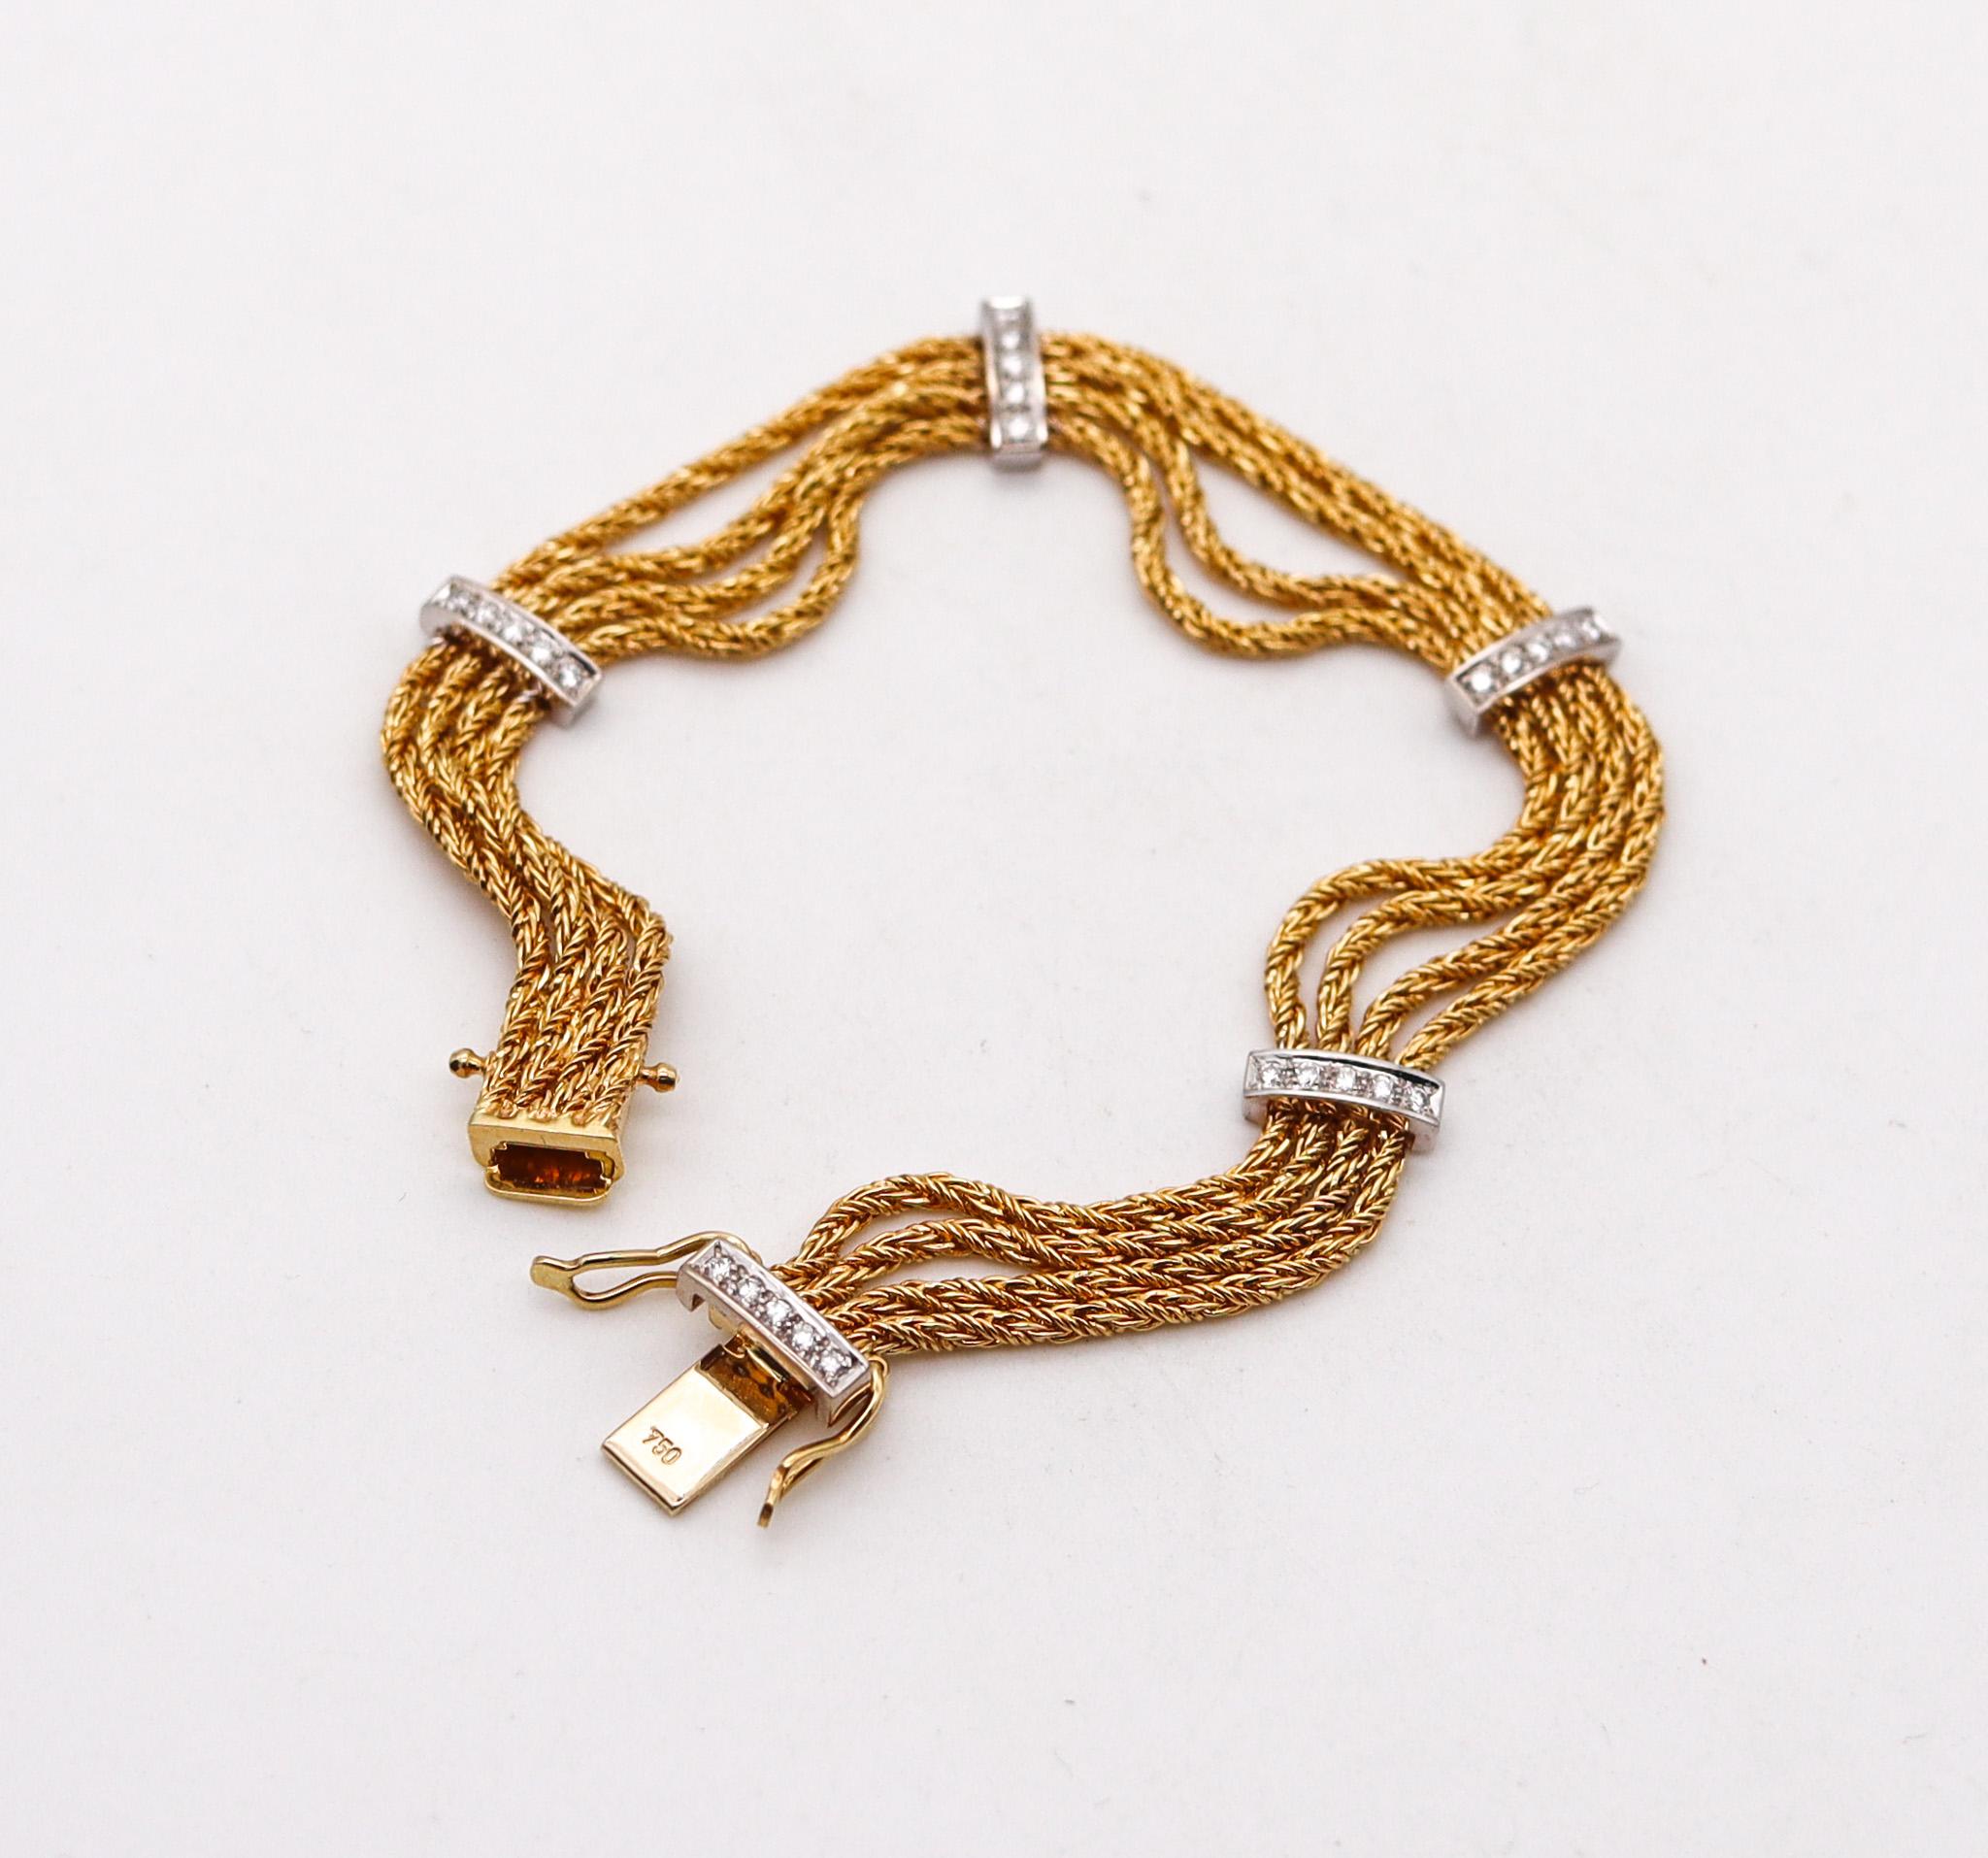 Modernist Tiffany & Co. Textured Station Chain Bracelet in 18kt Yellow Gold with Diamonds